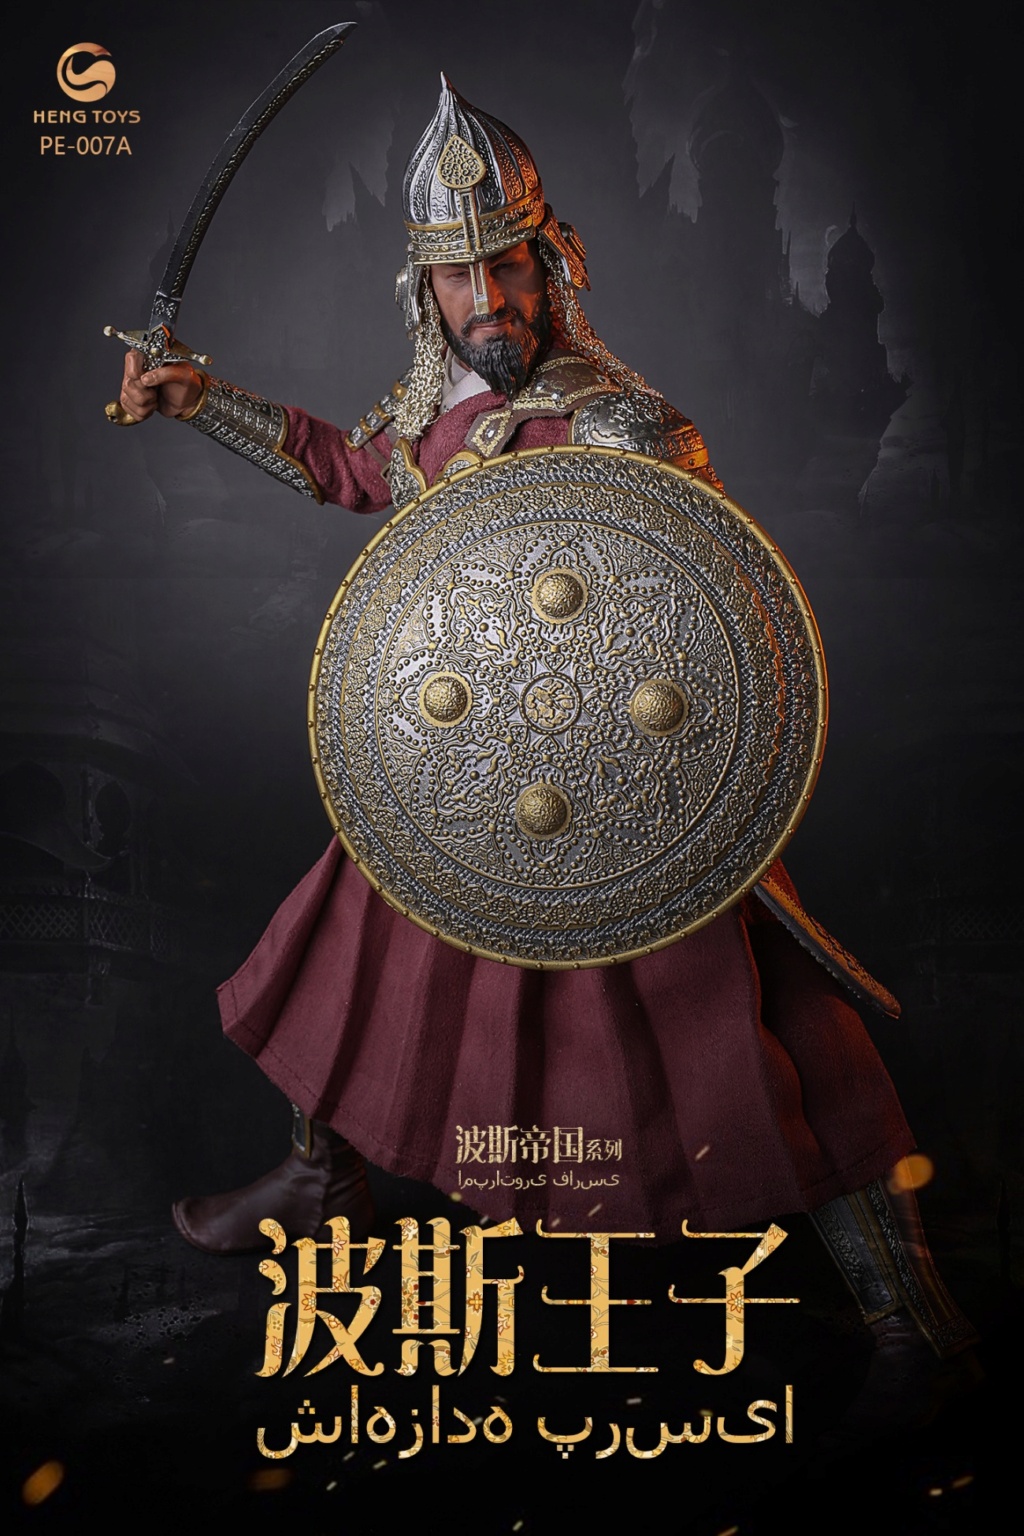 PrinceofPersia - NEW PRODUCT: HengToys: 1/6 Persian Empire Series-Prince of Persia [A & B Section] (#PE-007) 16032811